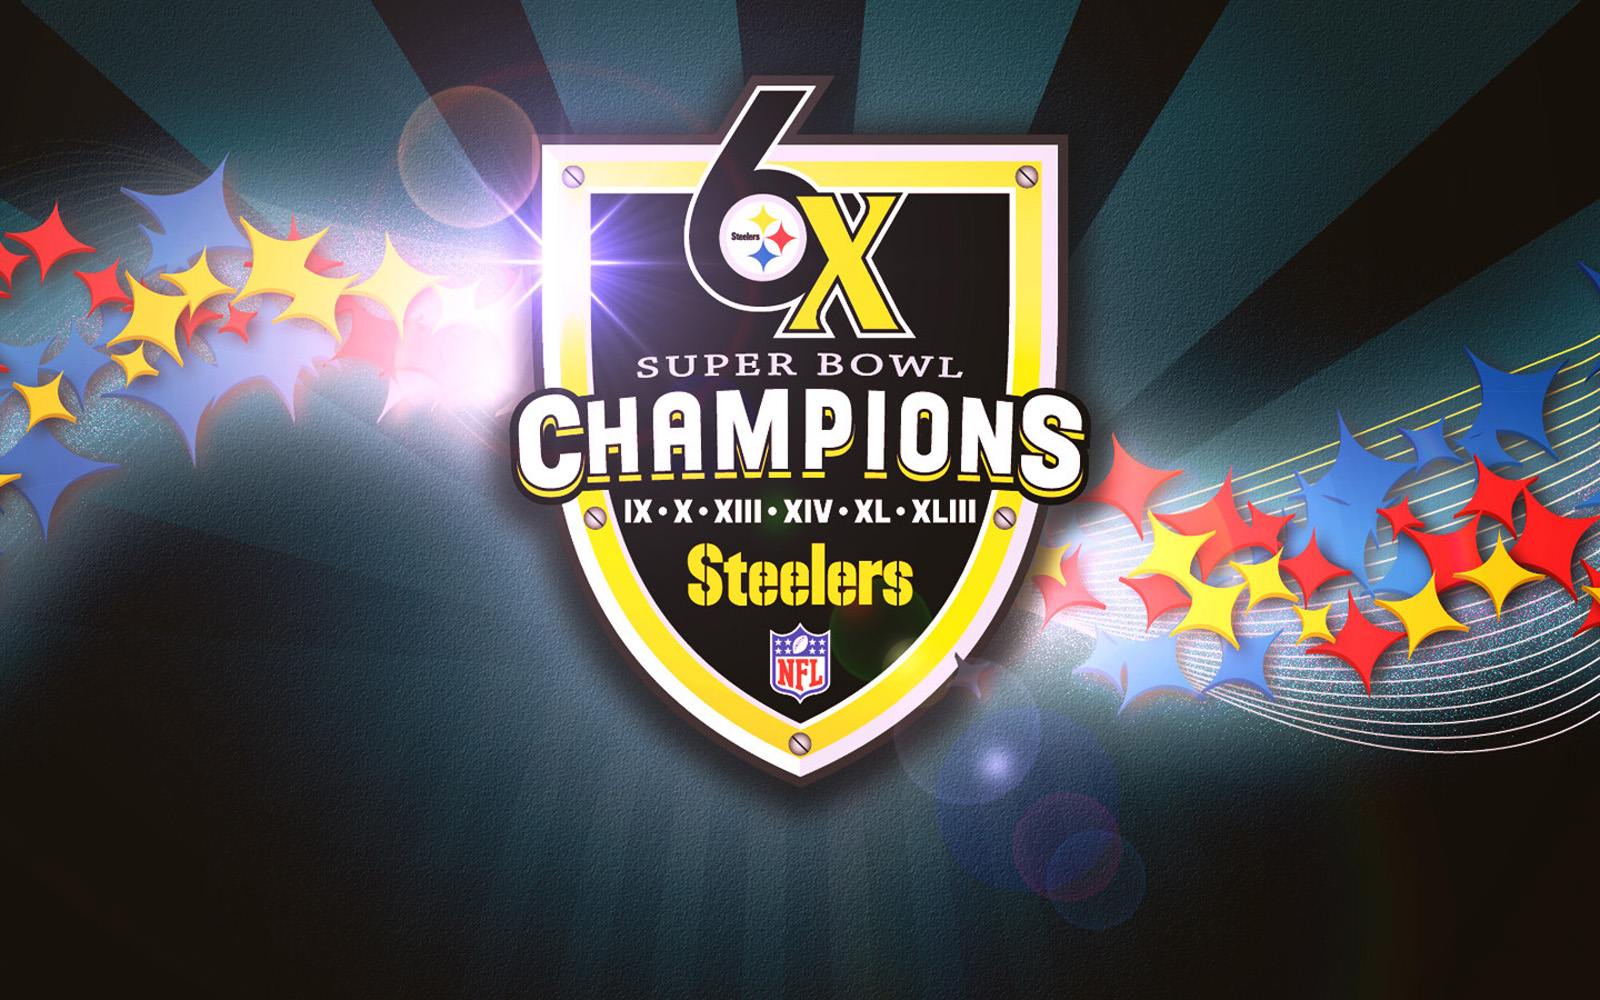 Steelers Puter Background